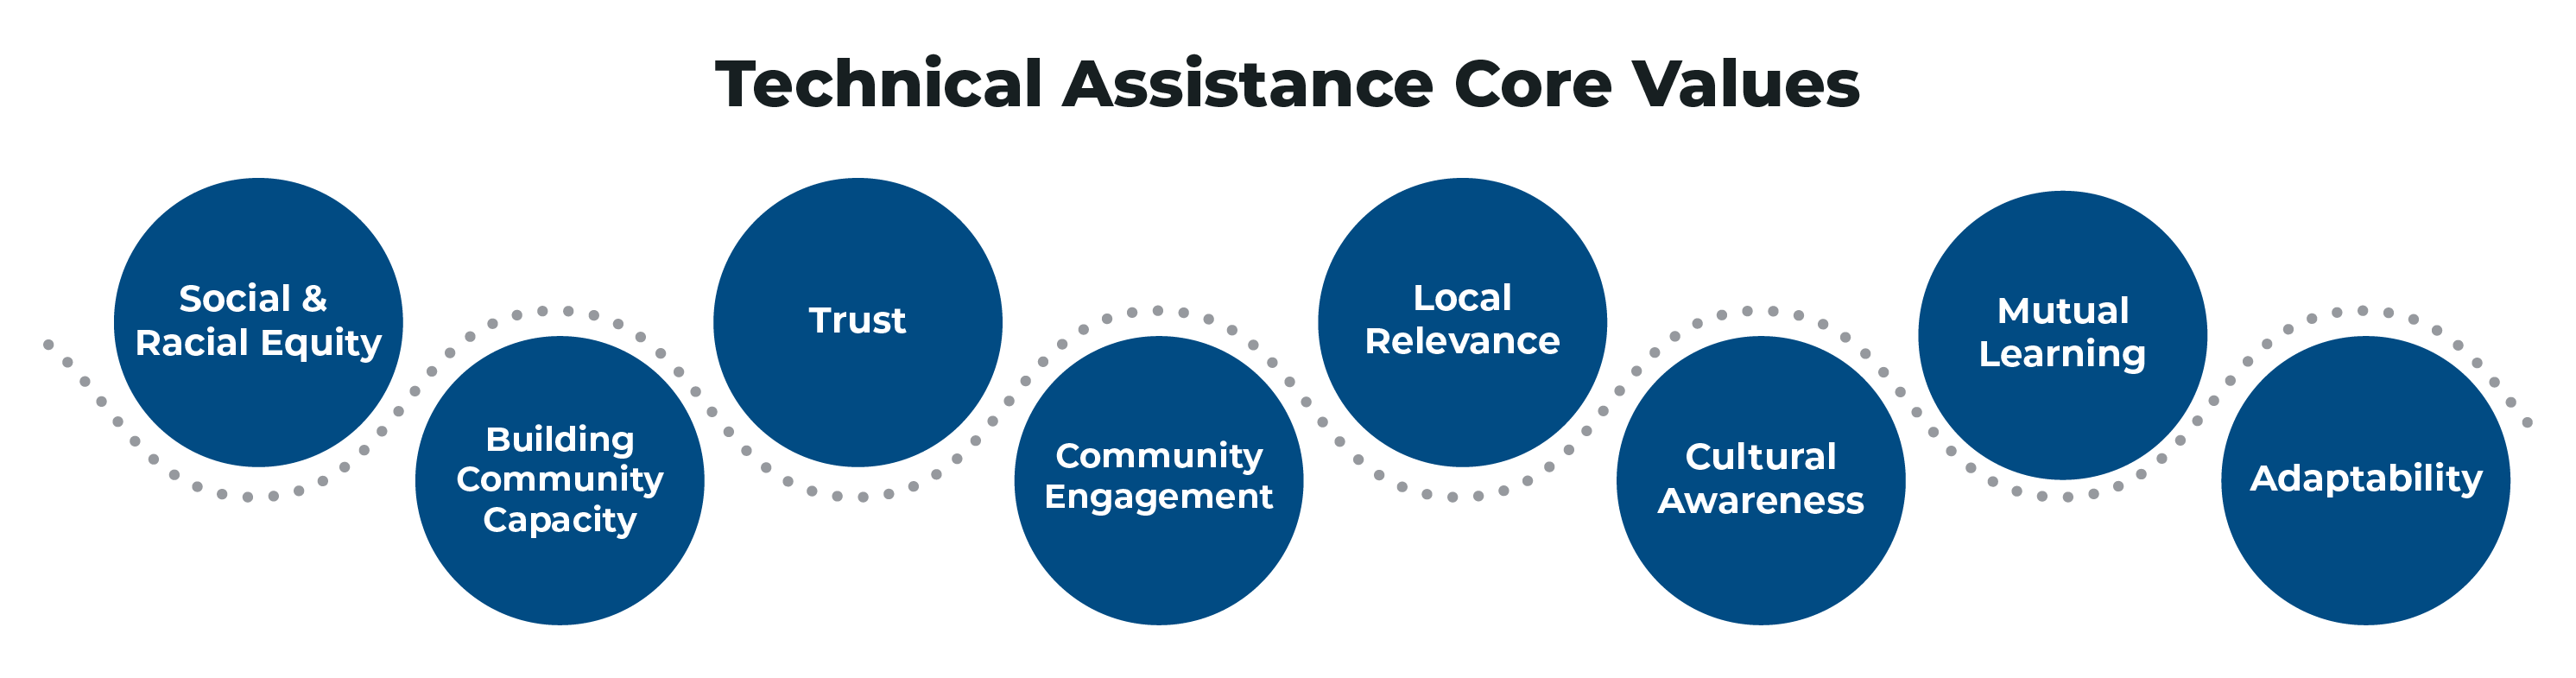 Technical Assistance Core Values cirlce: Racial and Social Equity, Capacity Building, Trust, Community Engagement, Relevance, Cultural Awareness, Mutual Learning, and Adaptability.